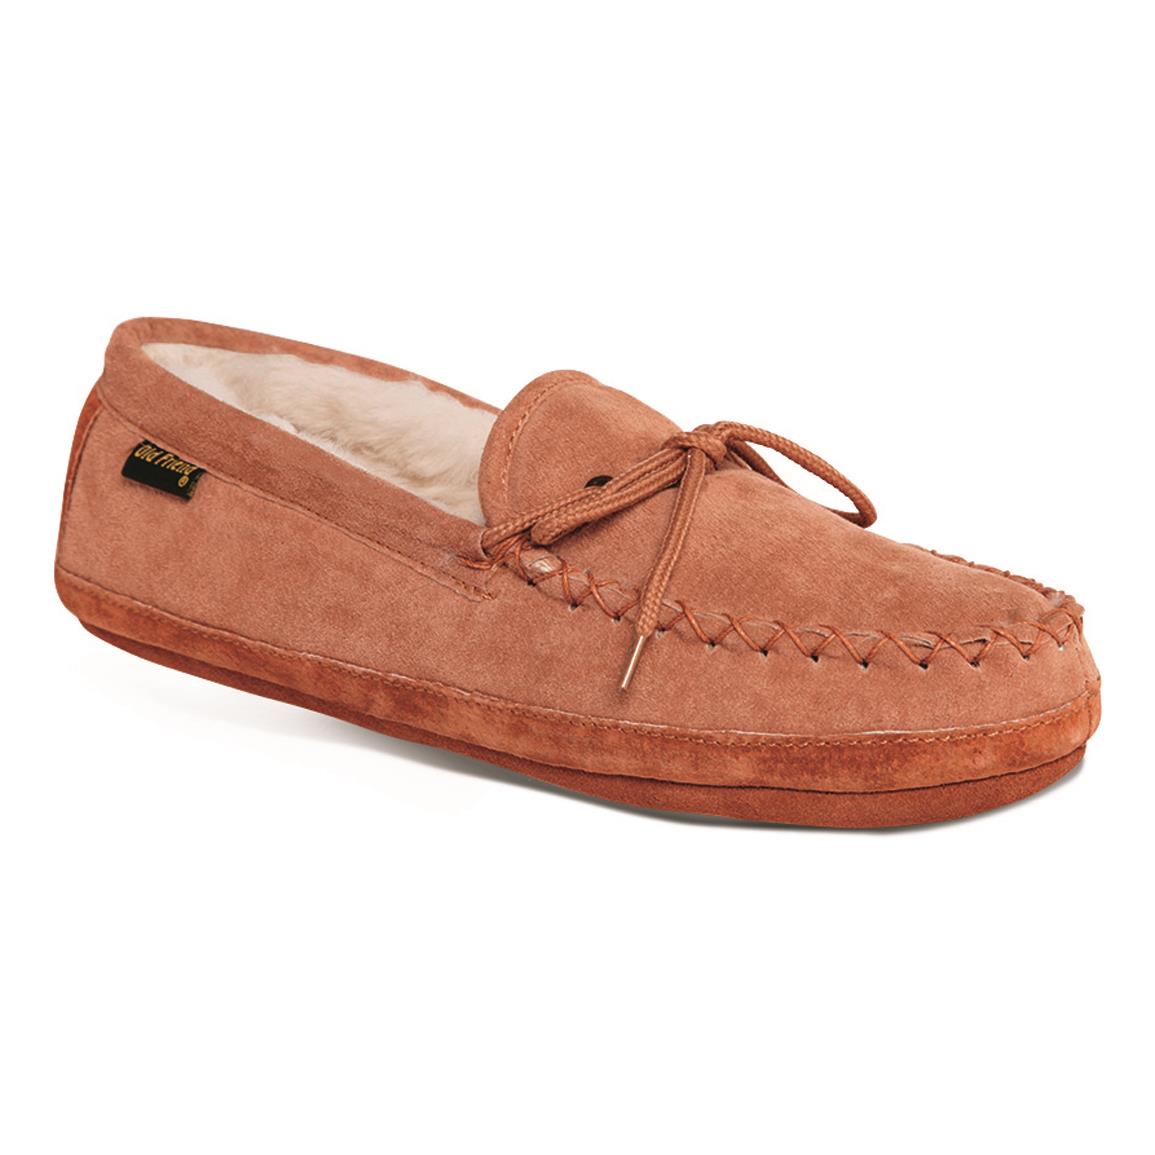 Old Friend Women's Soft Sole Moccasin Slippers, Chestnut